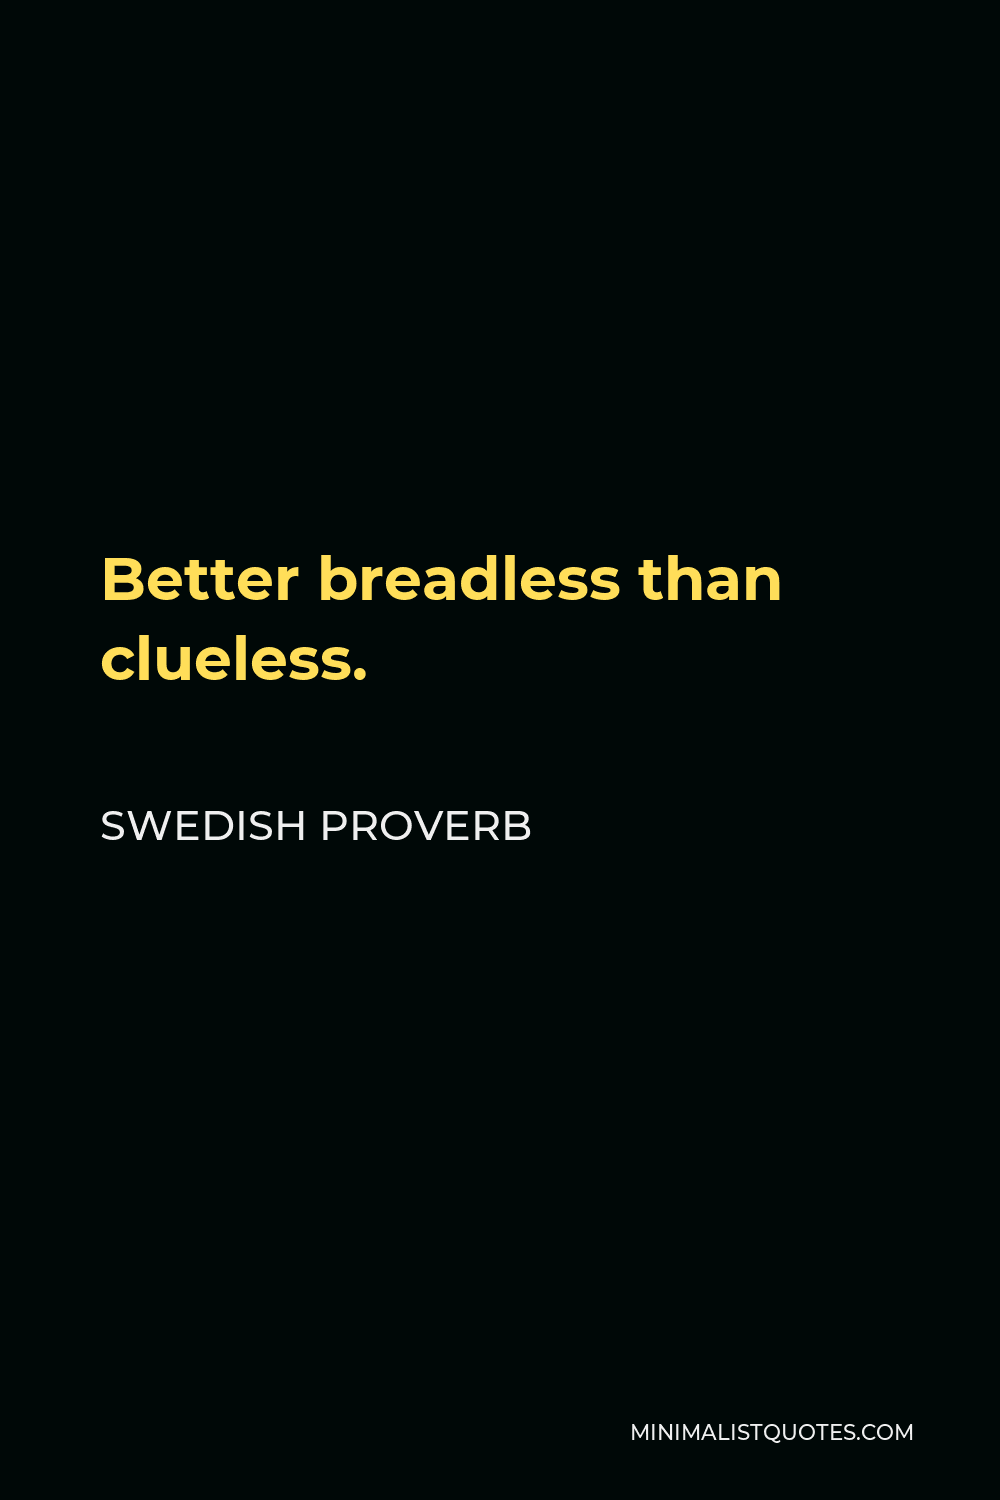 Swedish Proverb Quote - Better breadless than clueless.